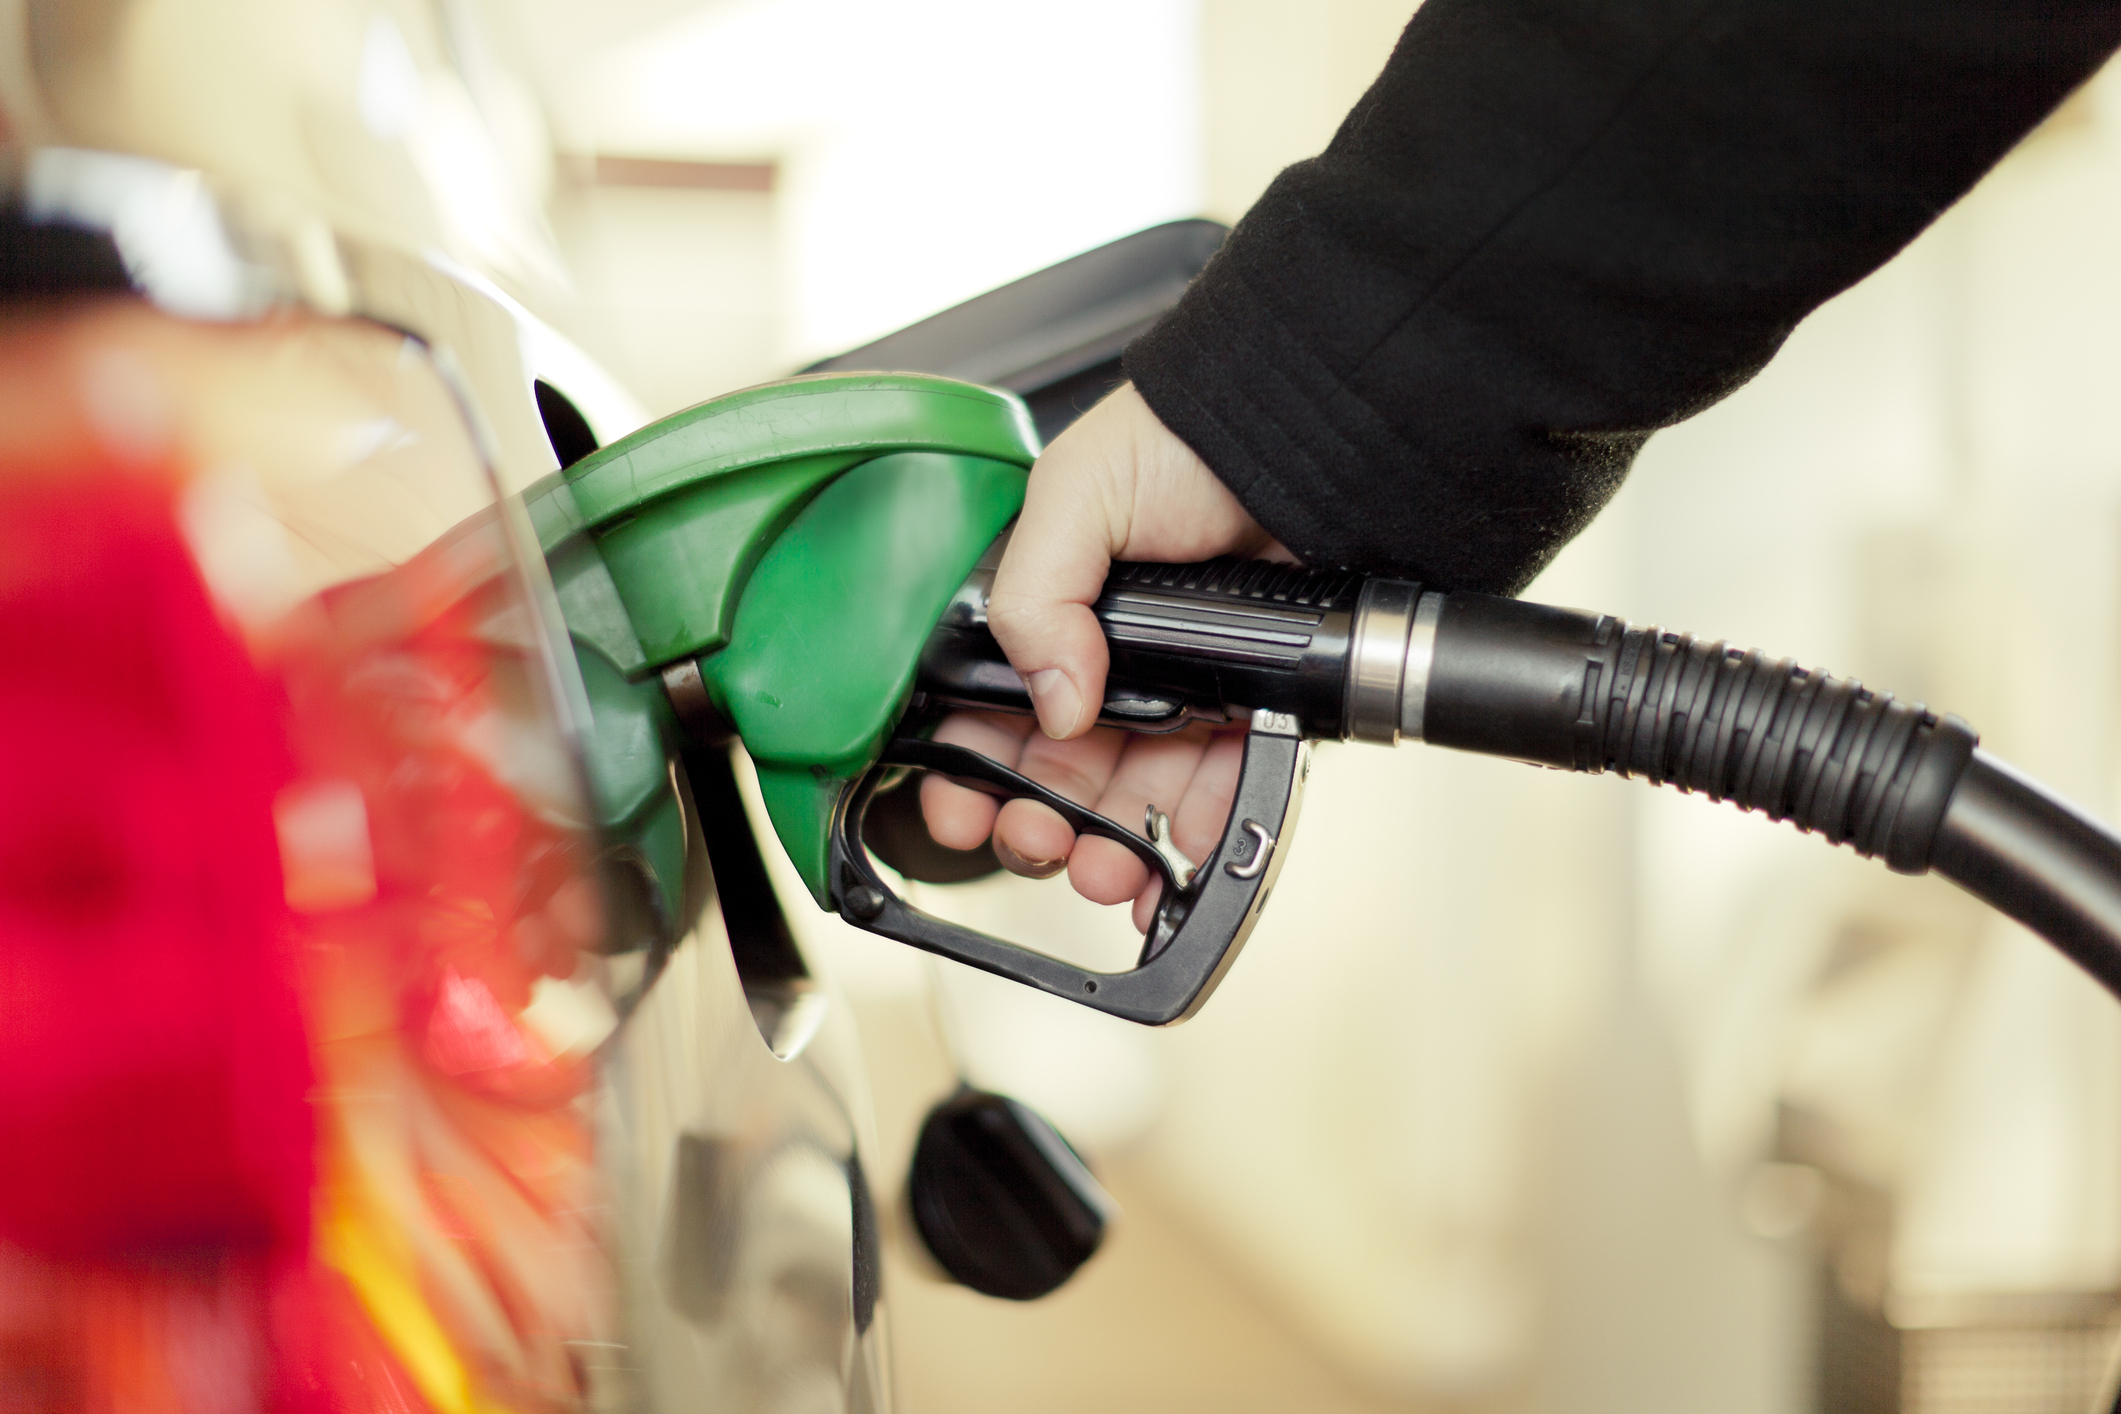 Iran: Fuel Prices May Rise as of March